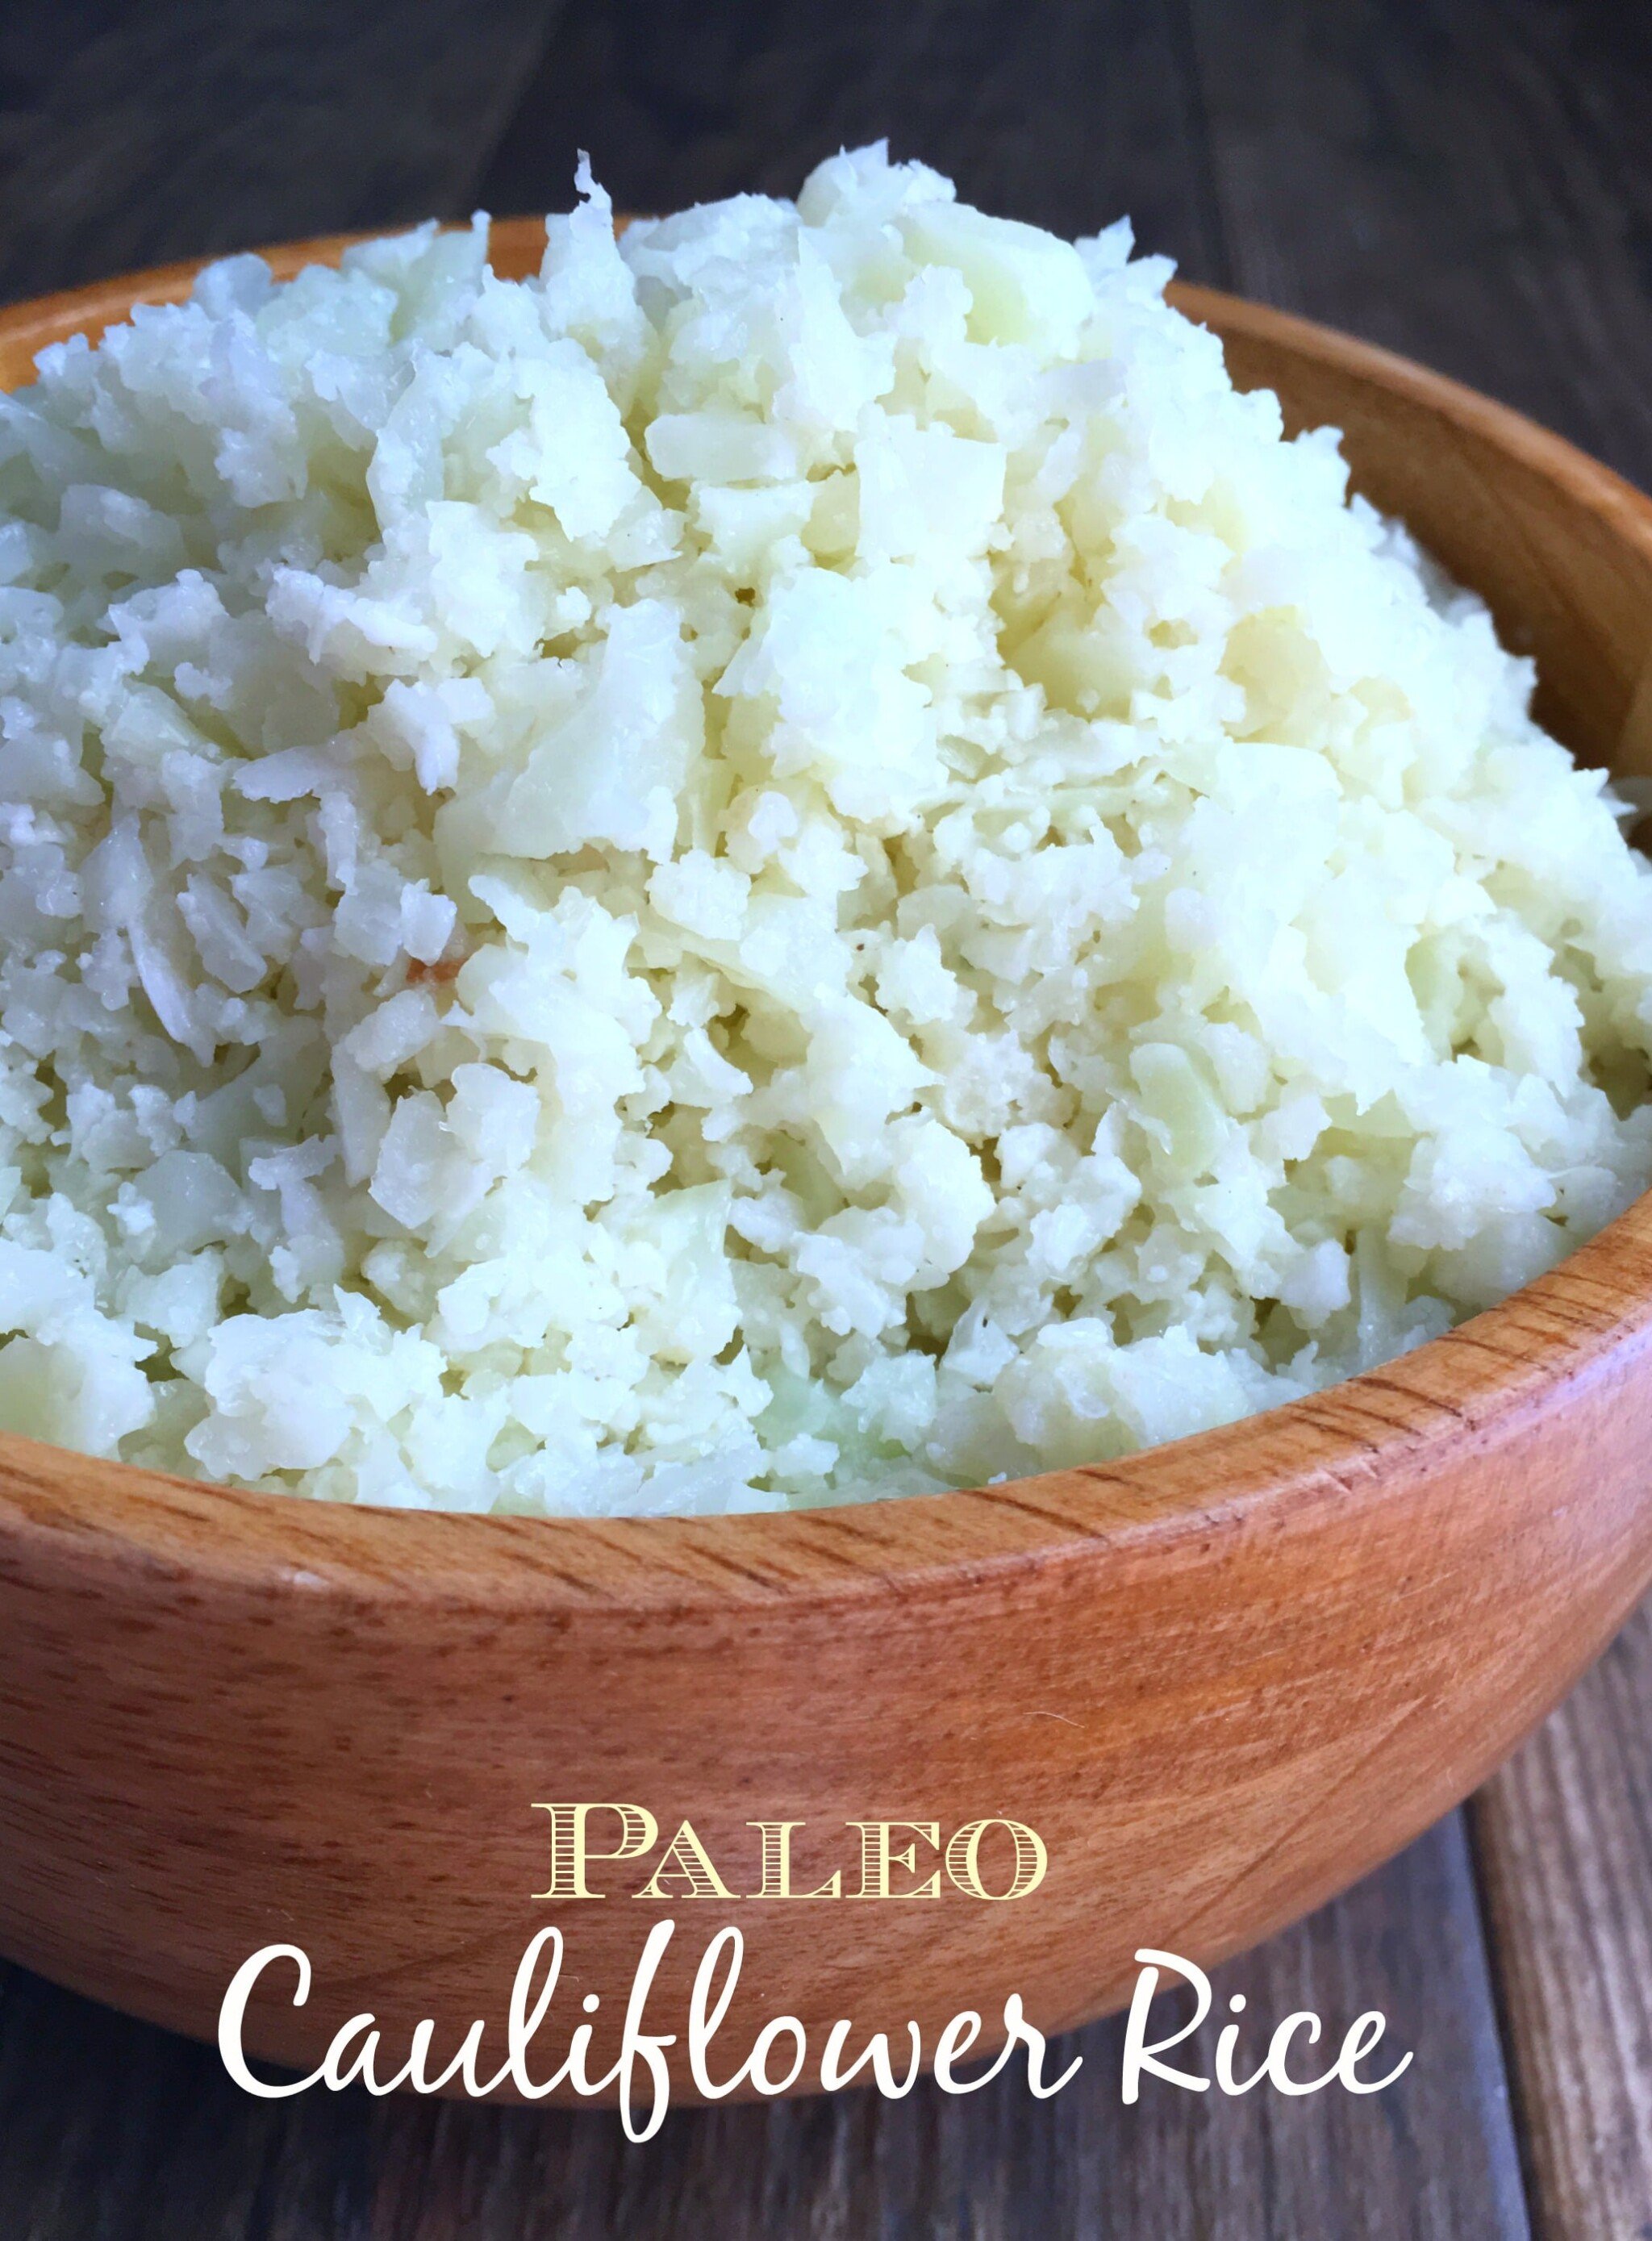 This healthy Paleo Cauliflower Rice is a delicious and filling side dish that you can add to your diet for it's impressive array of nutrients, including vitamins, minerals and antioxidants.